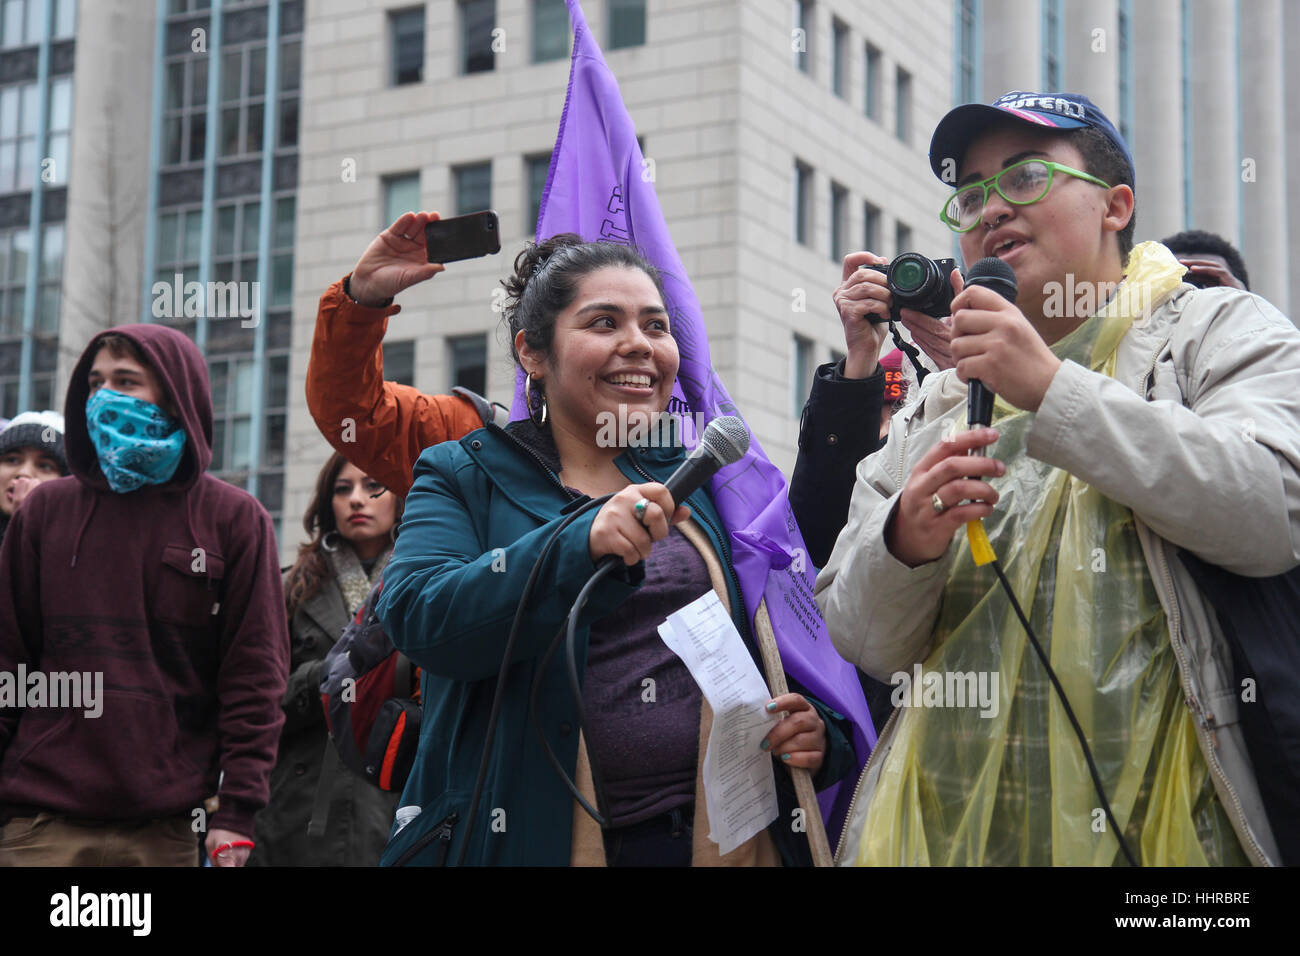 Washington, USA. 20th January, 2017. Protesters speak on the day of the inauguration of Donald J Trump as President of the United States. Credit: Susan Pease/Alamy Live News Stock Photo